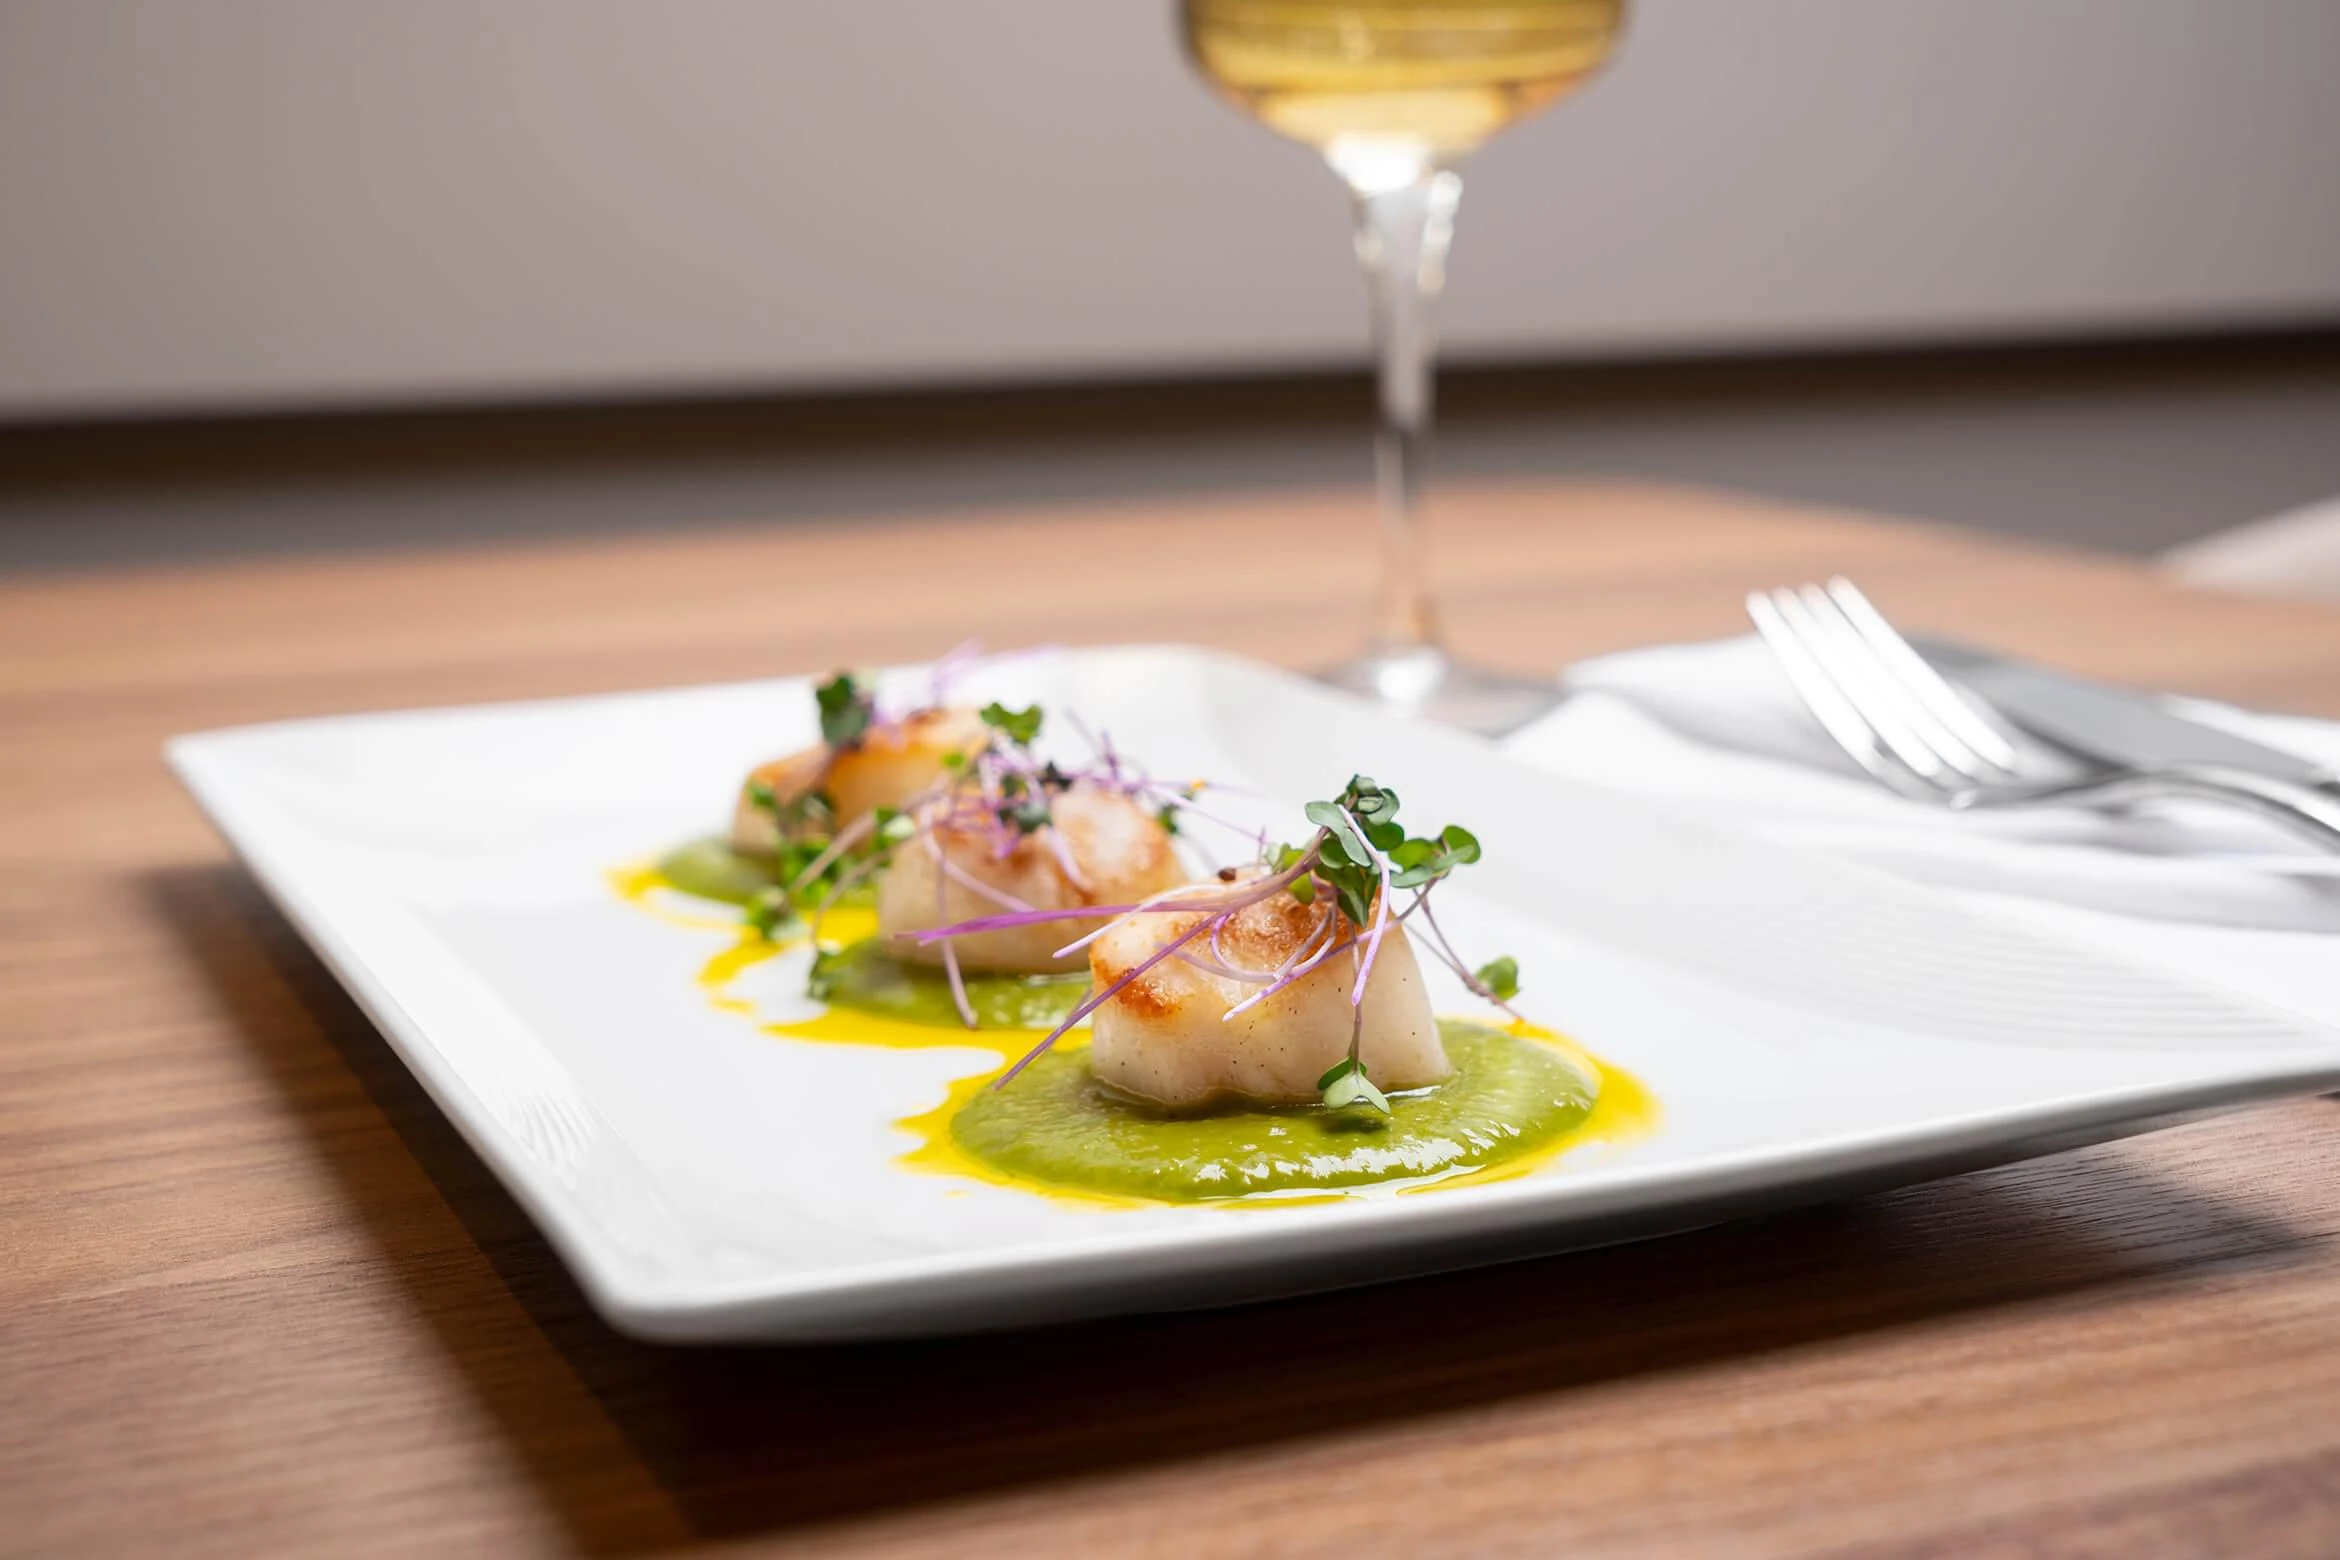 A plate of three scallops on top of green puree beside a glass of white wine.